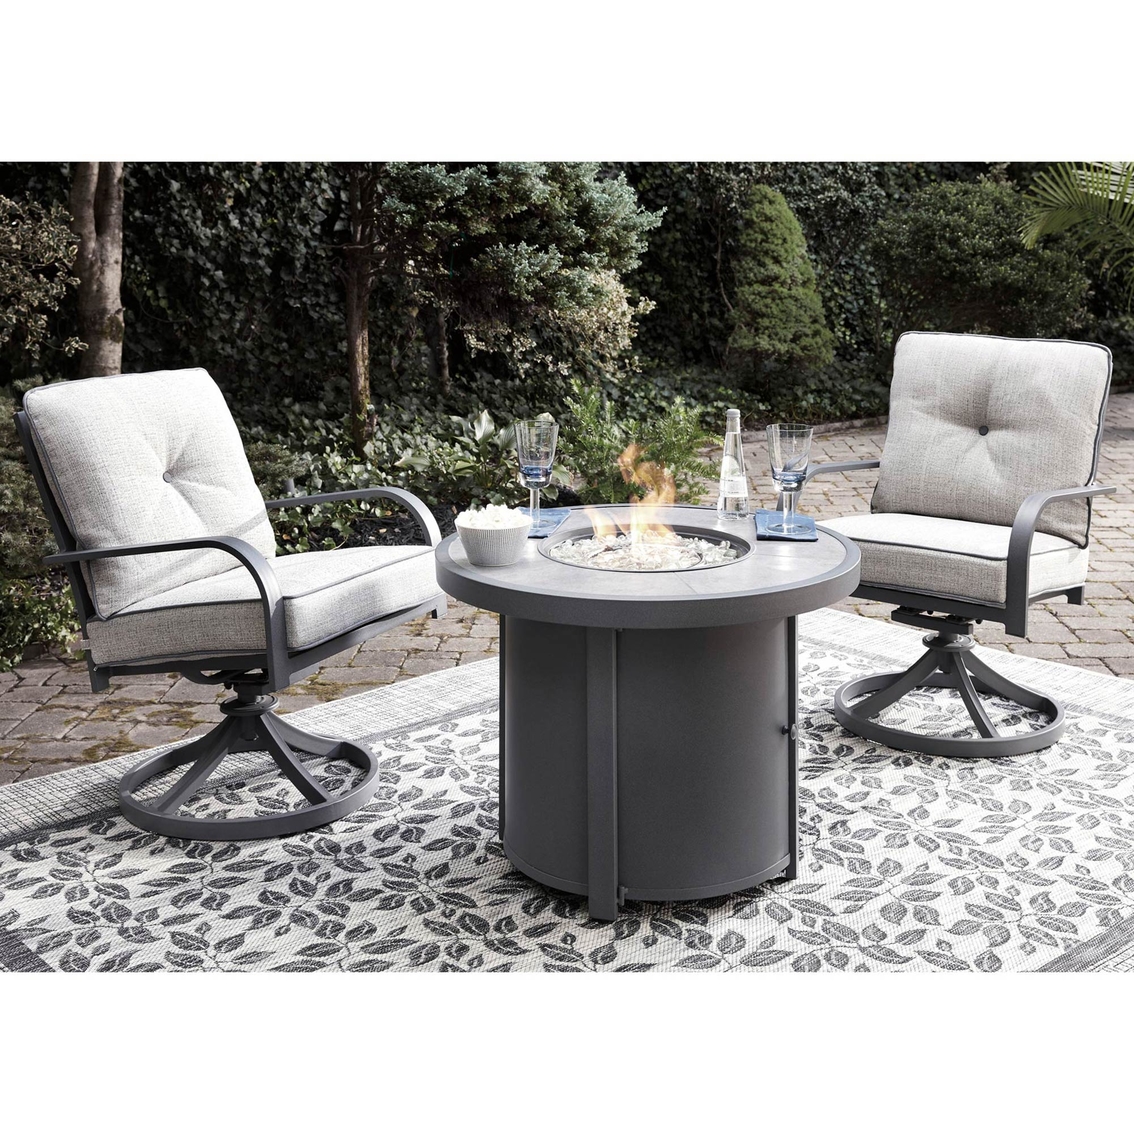 Ashley Donnalee Bay Firepit and 2 Swivel Chairs Set - Image 2 of 4